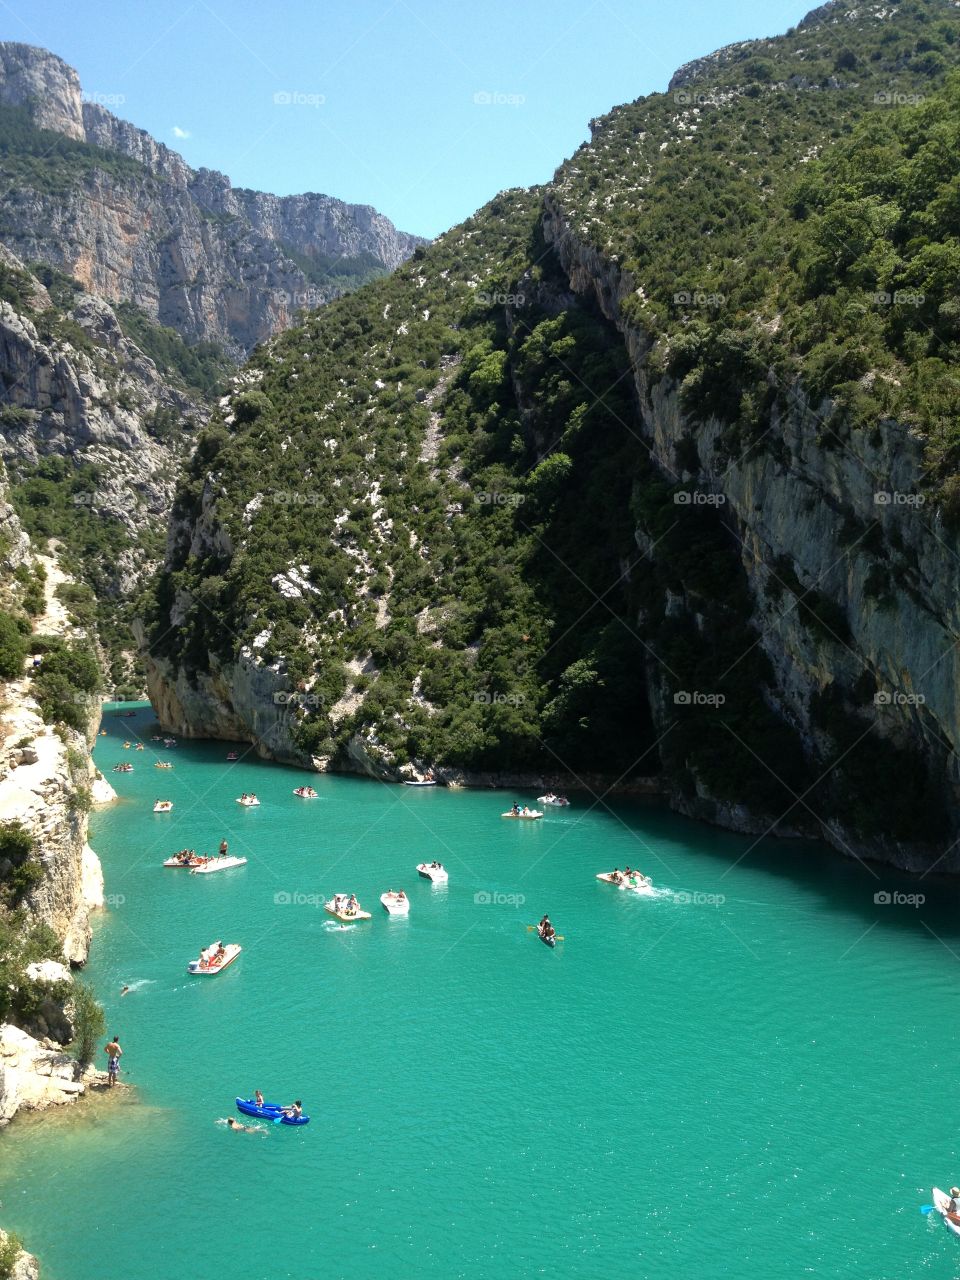 The lake . The lake in France which is called lac de sainte croix in verdon, France 